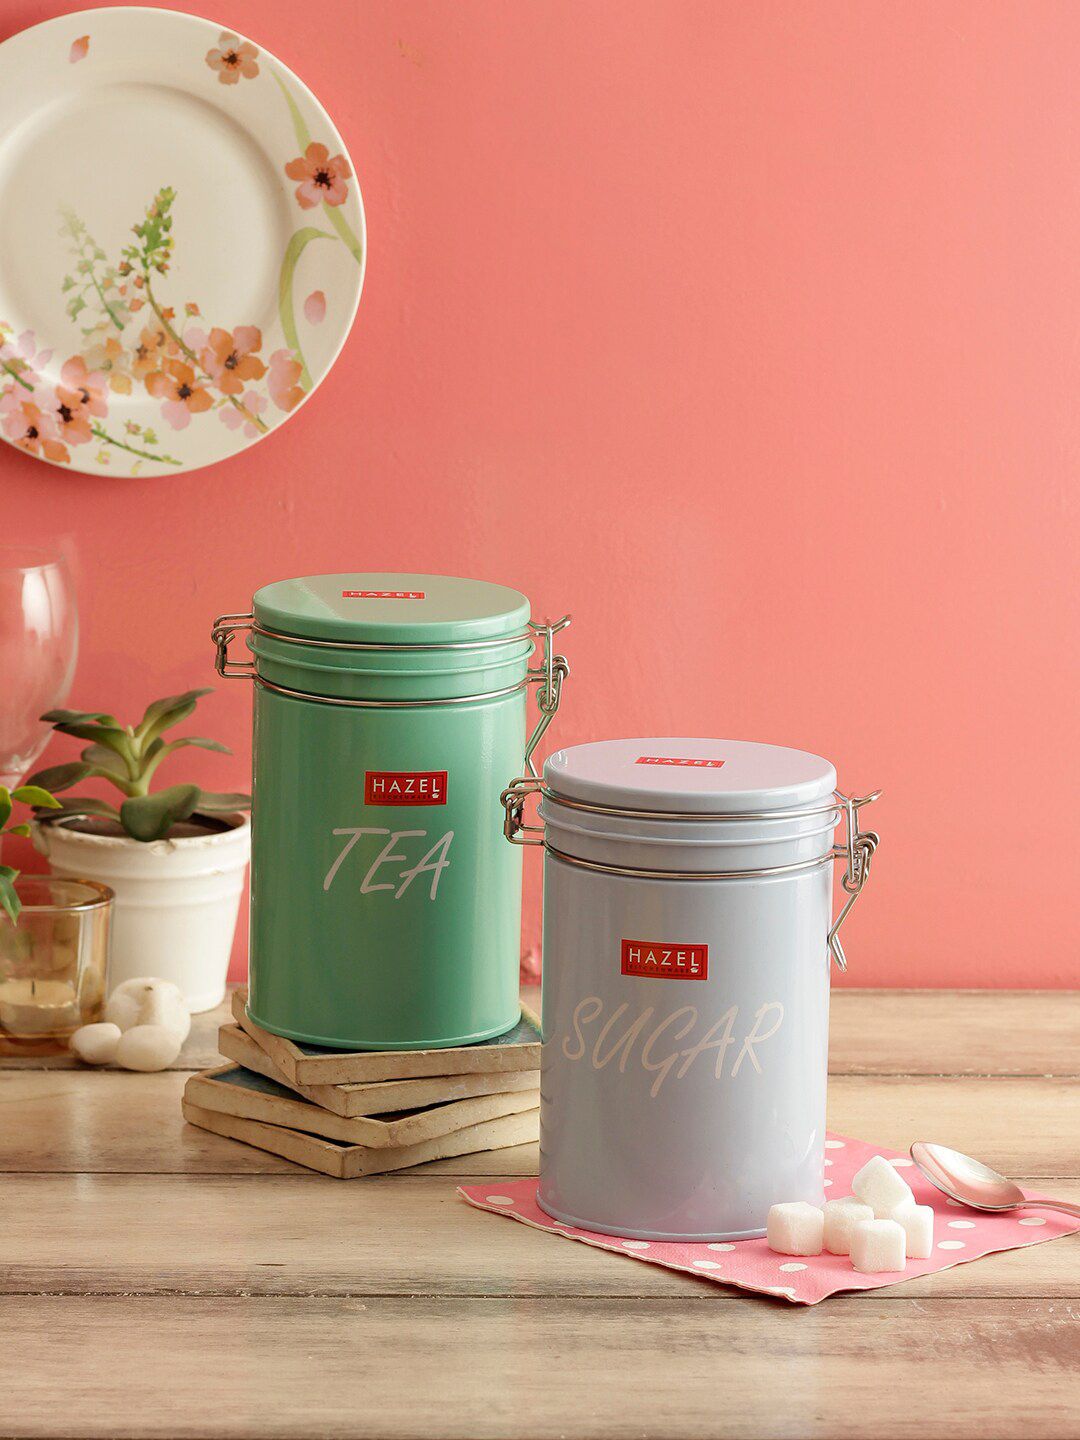 HAZEL Set Of 2 Blue & Green Round Sugar Tea Storage Canister Containers Price in India